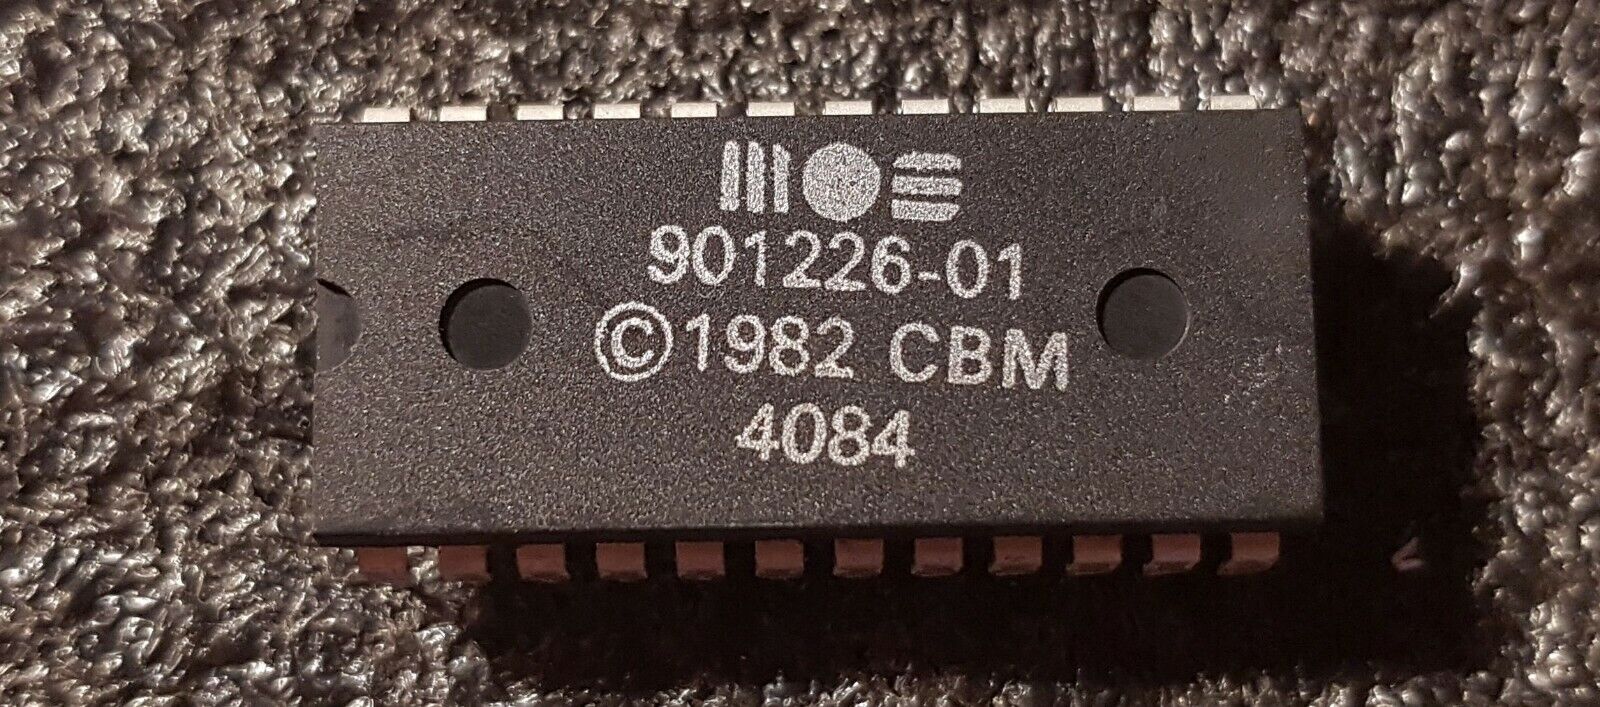 MOS 901226-01 BASIC ROM Chip, IC for Commodore 64, Tested and Working.